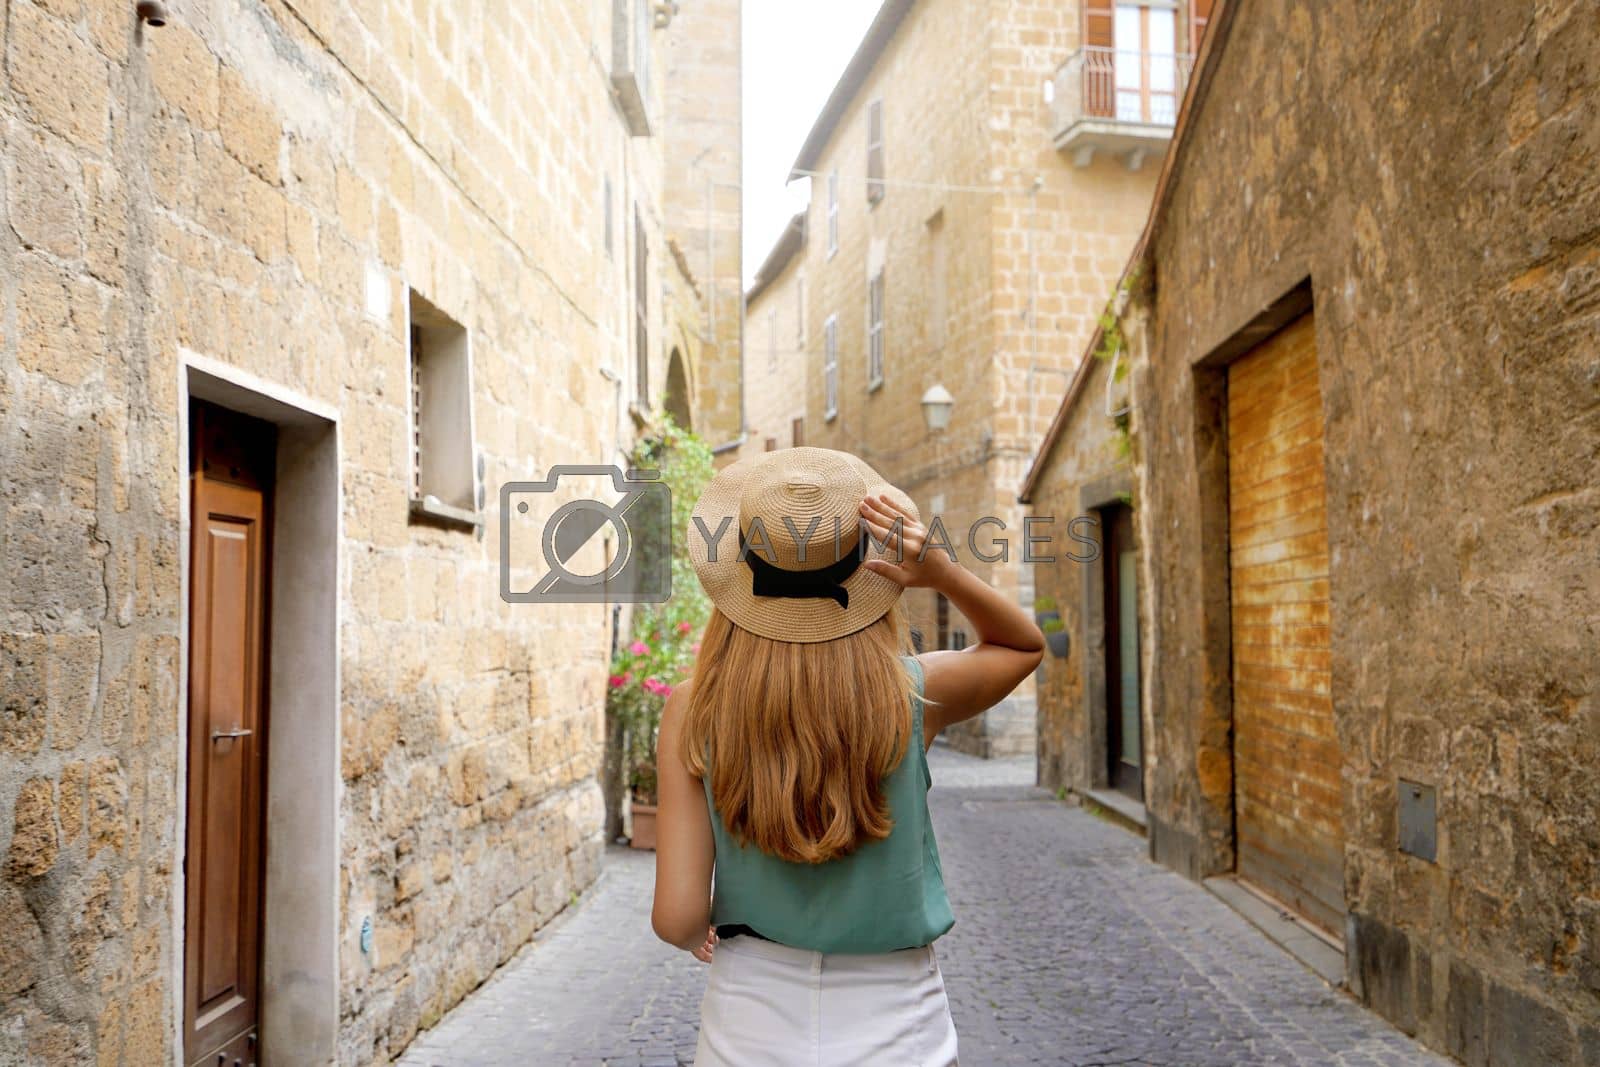 Royalty free image of Holidays in Italy. Young woman visiting historic medieval town of Orvieto, Umbria, Italy. by sergio_monti